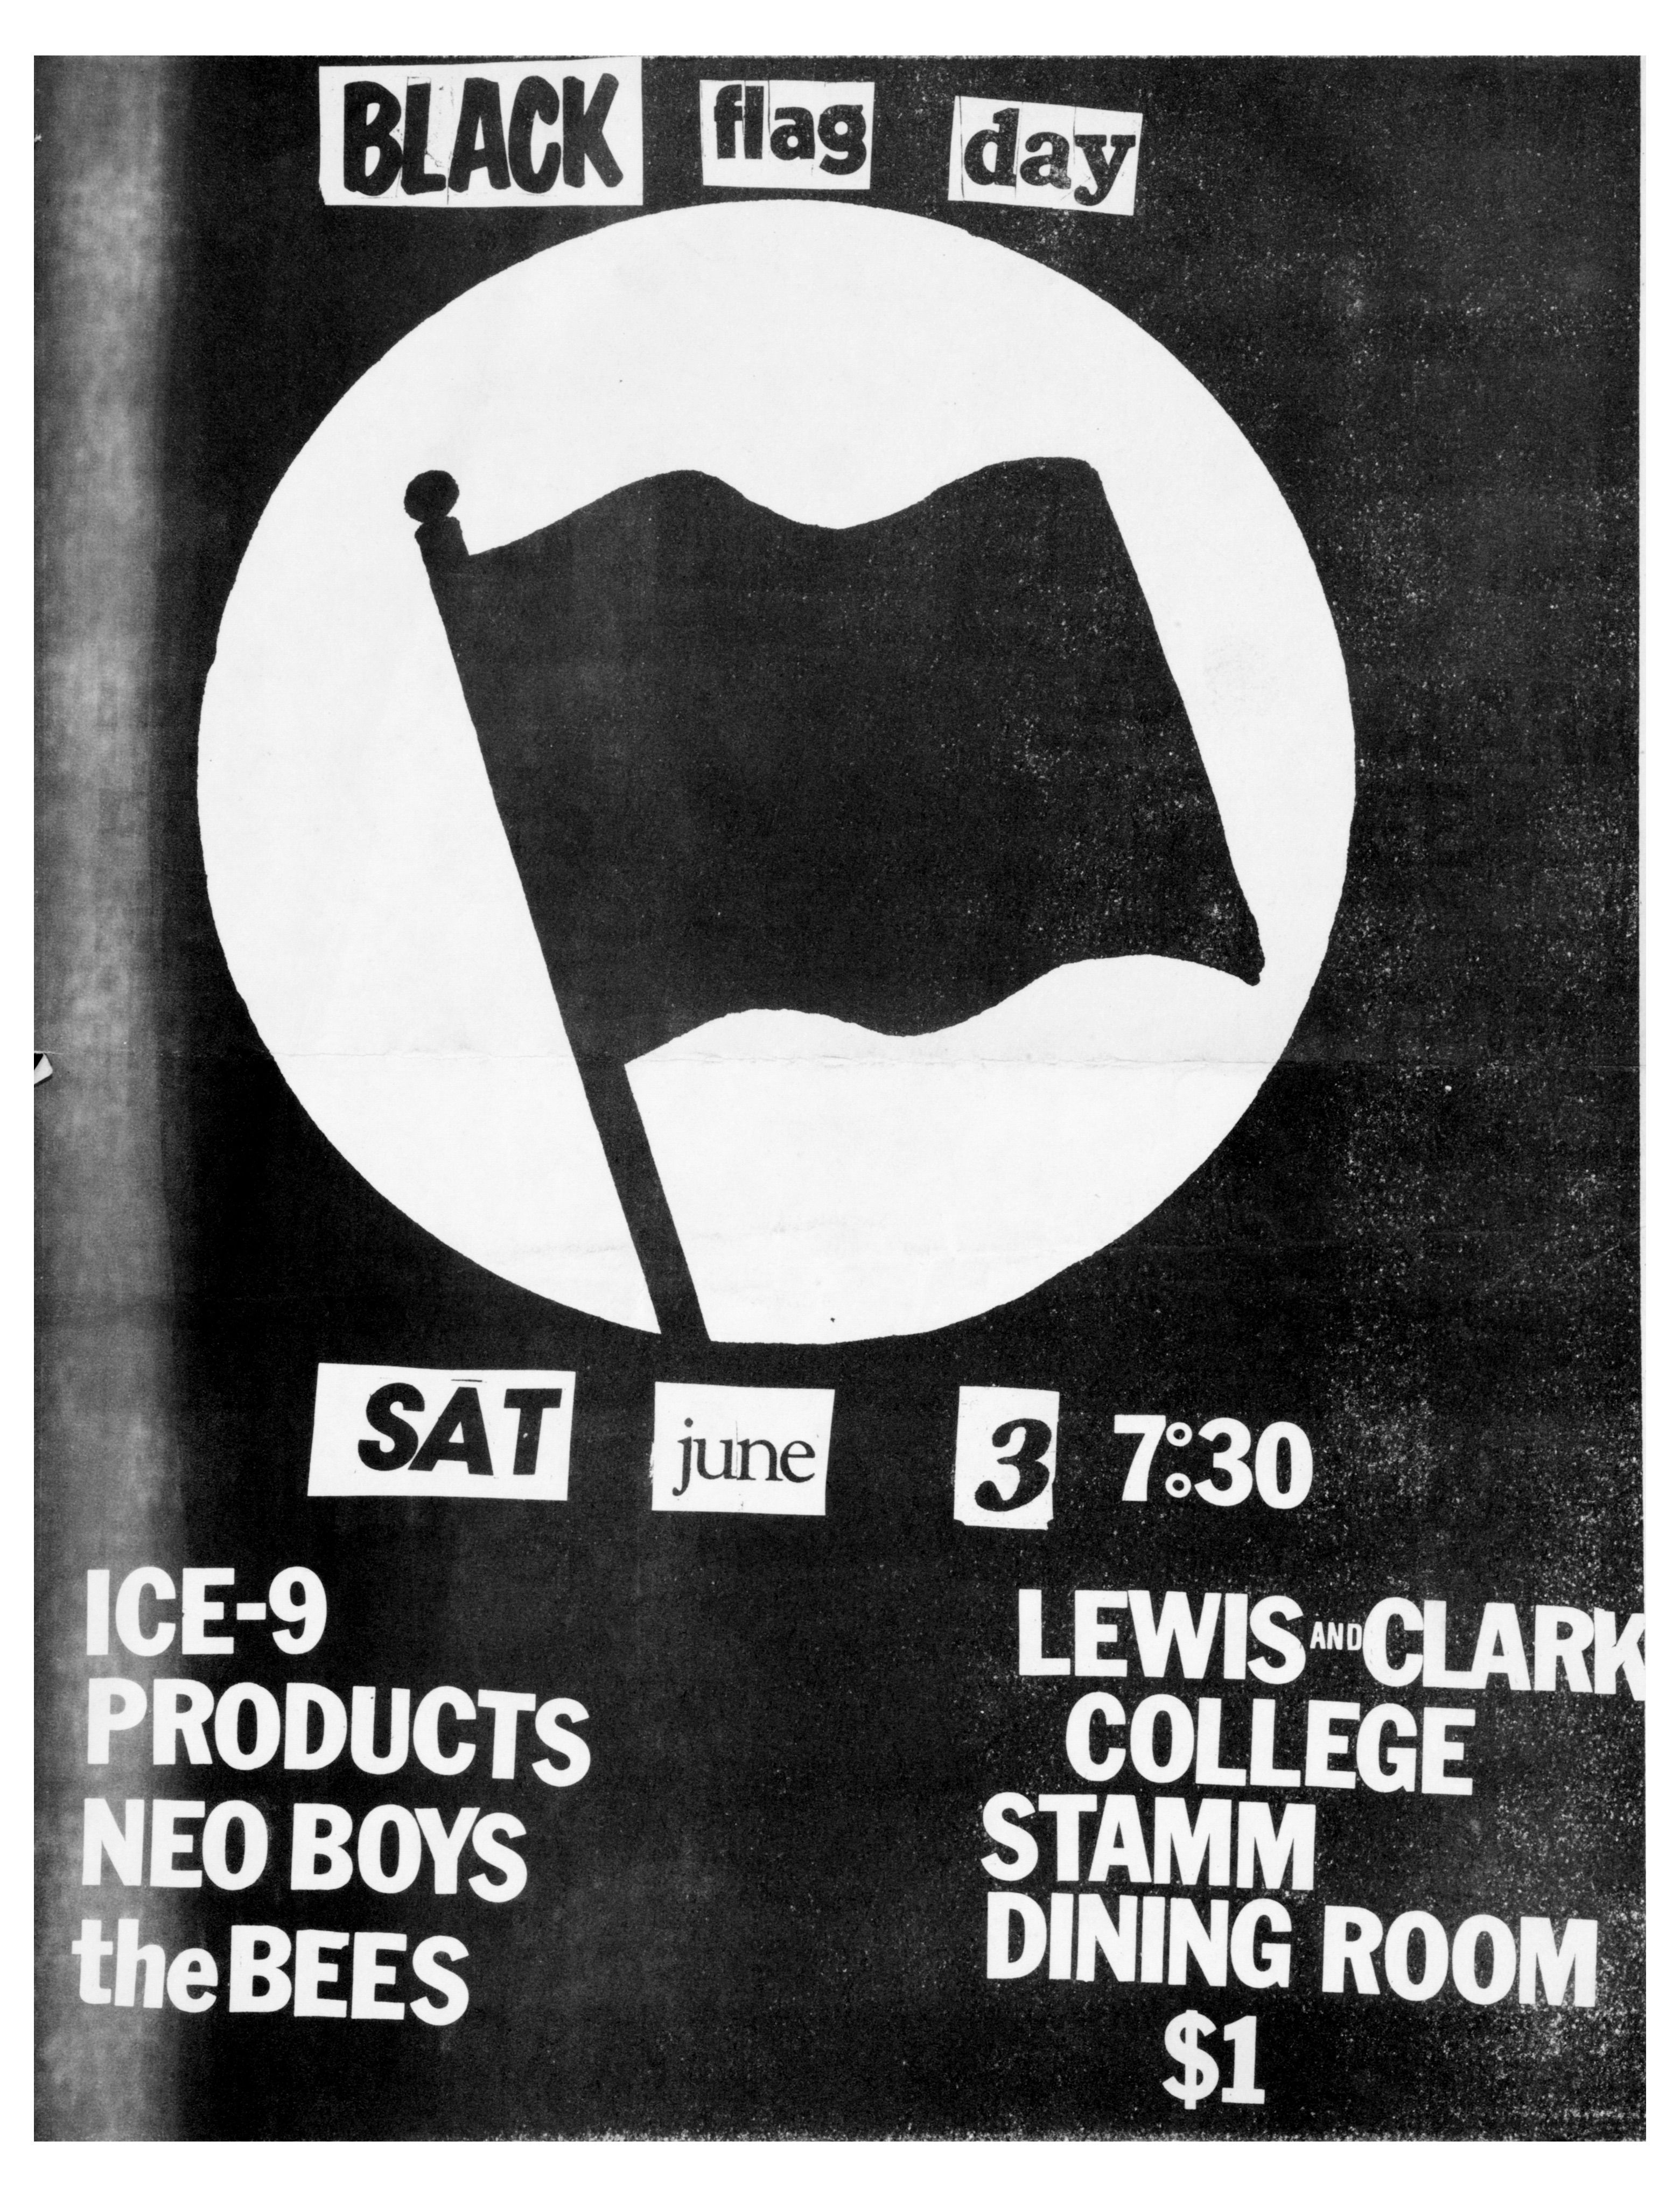 MXP-43.4 Black Flag Day featuring Ice 9 & Neo Boys Lewis & Clark College 1981 Concert Poster